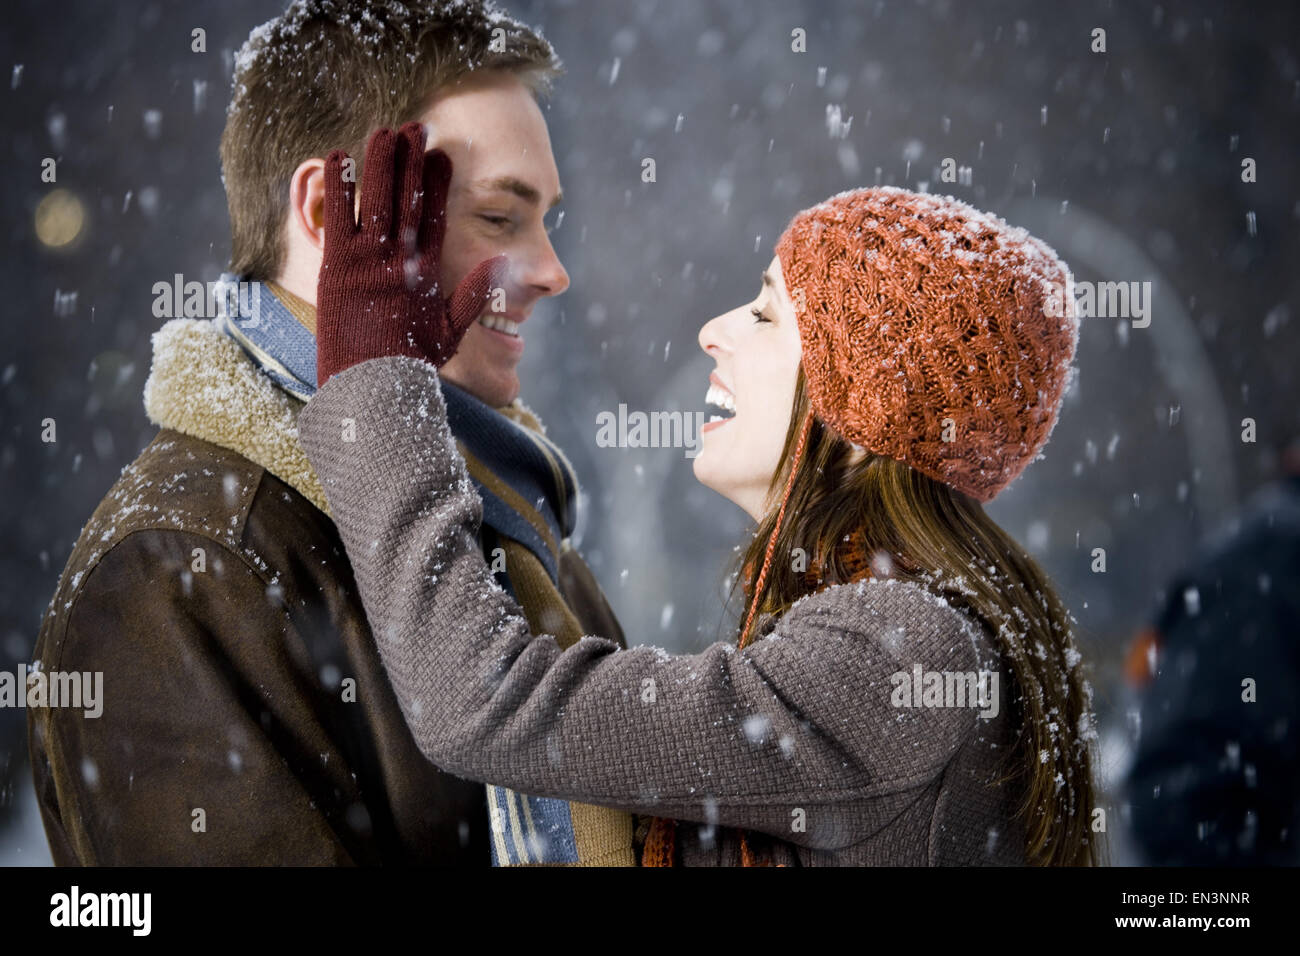 Man and woman outdoors in winter smiling Stock Photo